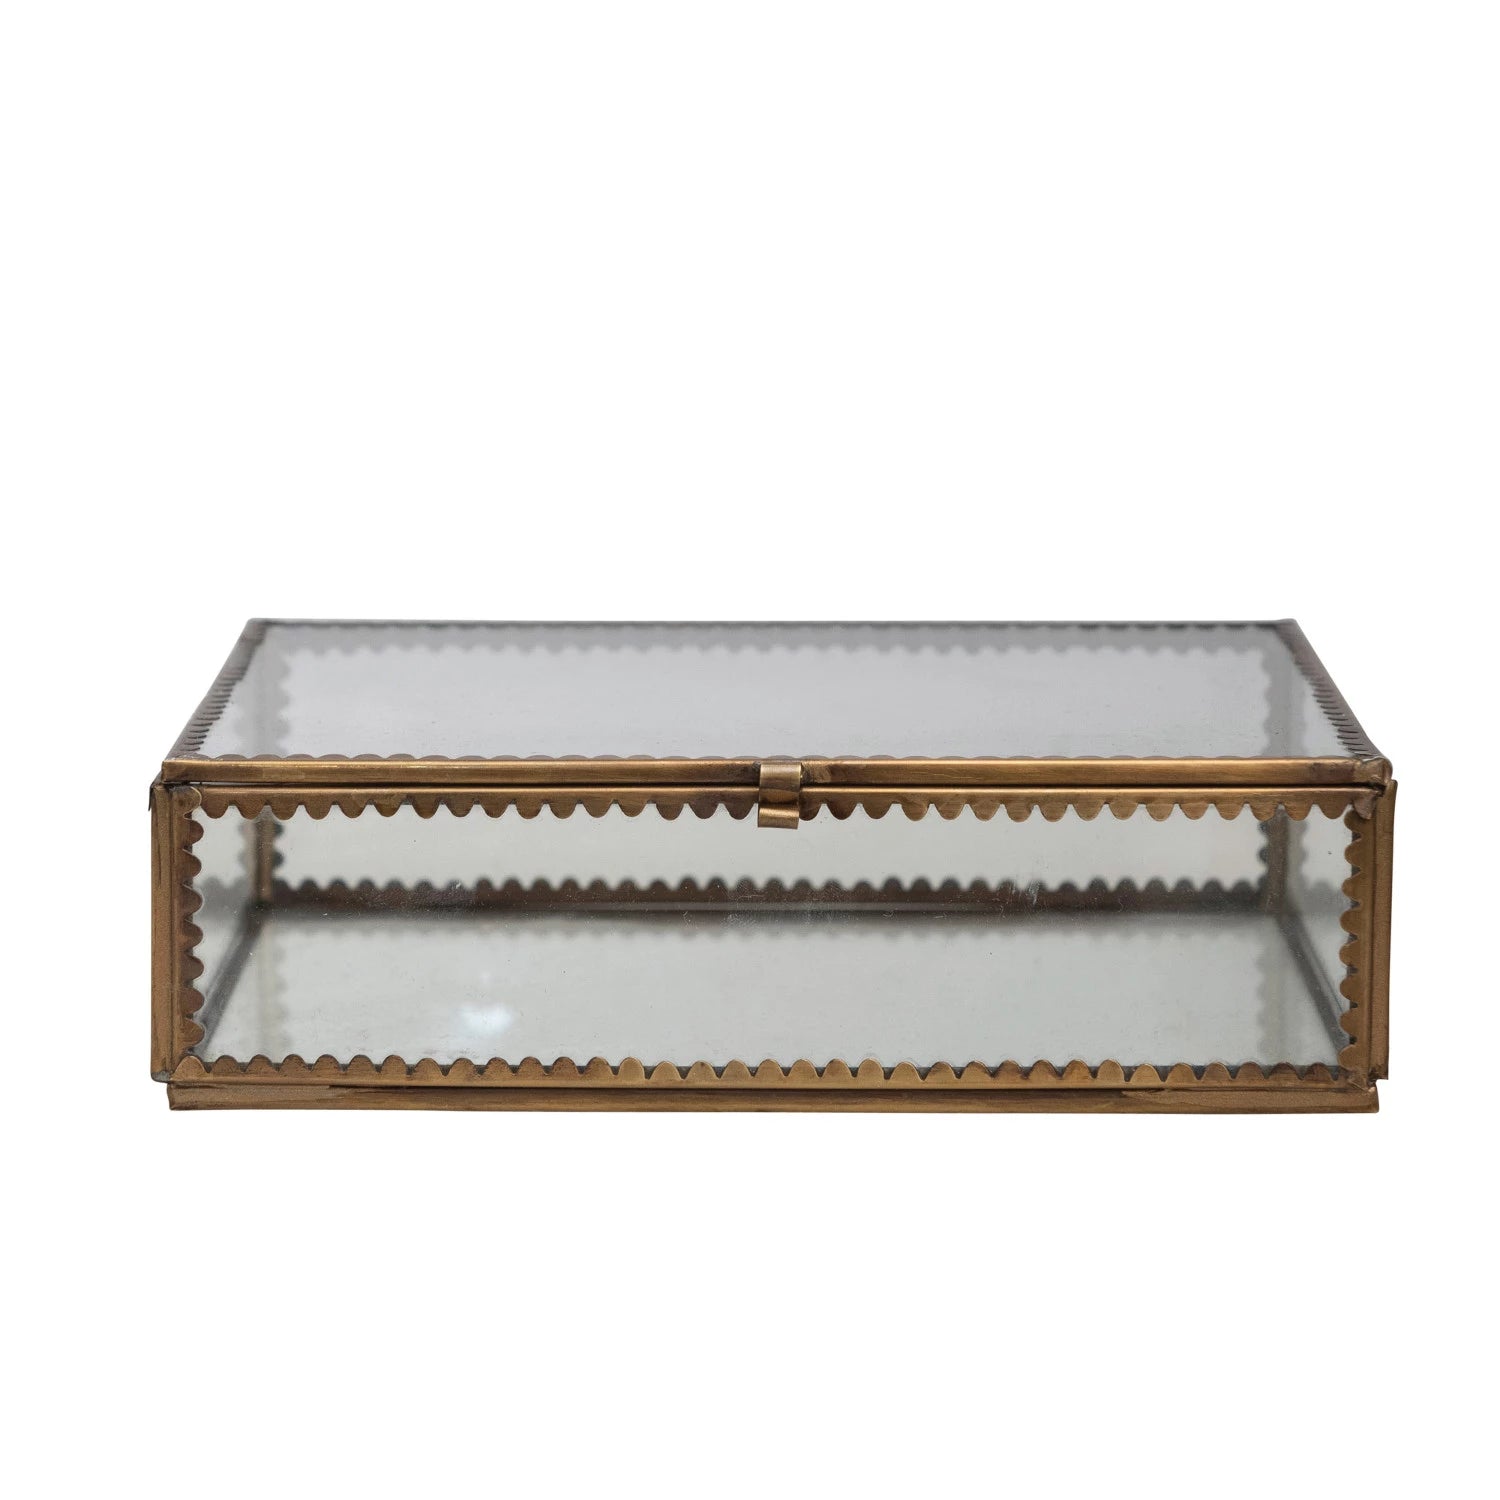 Glass & Metal Box with Scalloped Edges